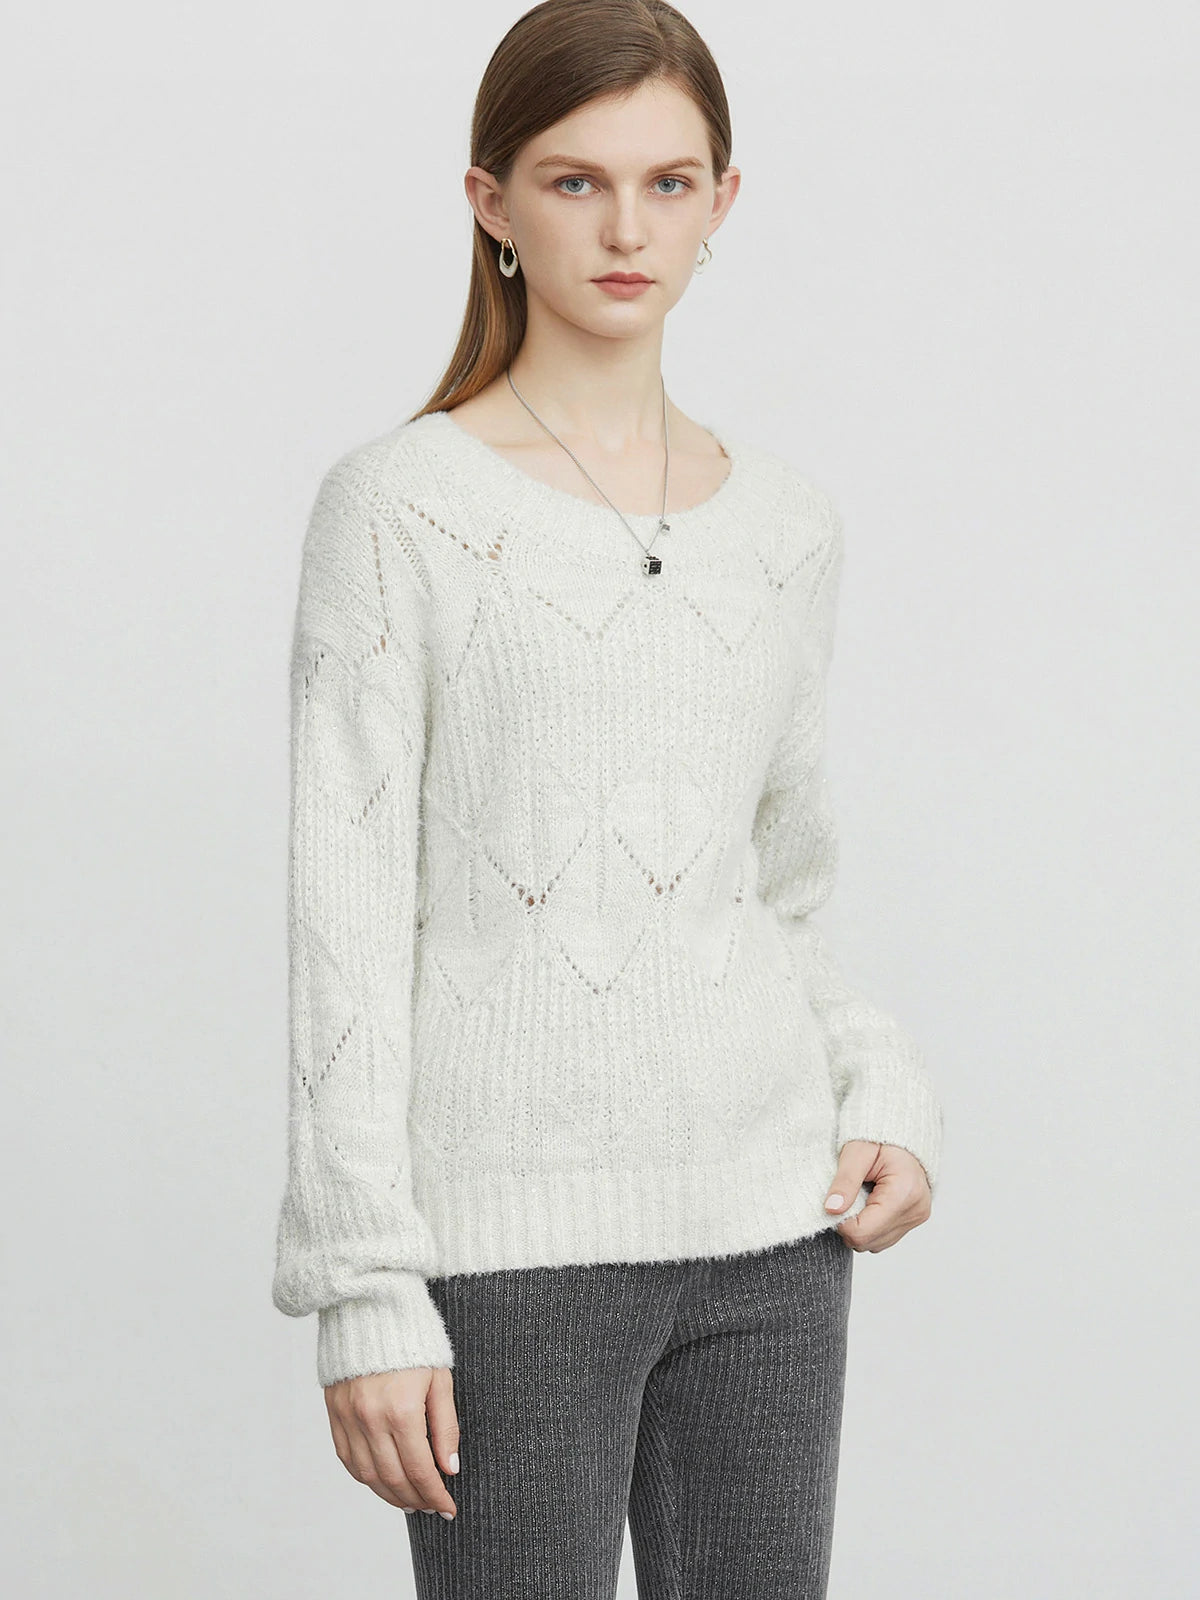 Vintage-inspired knit sweater with round neck and crochet detailing